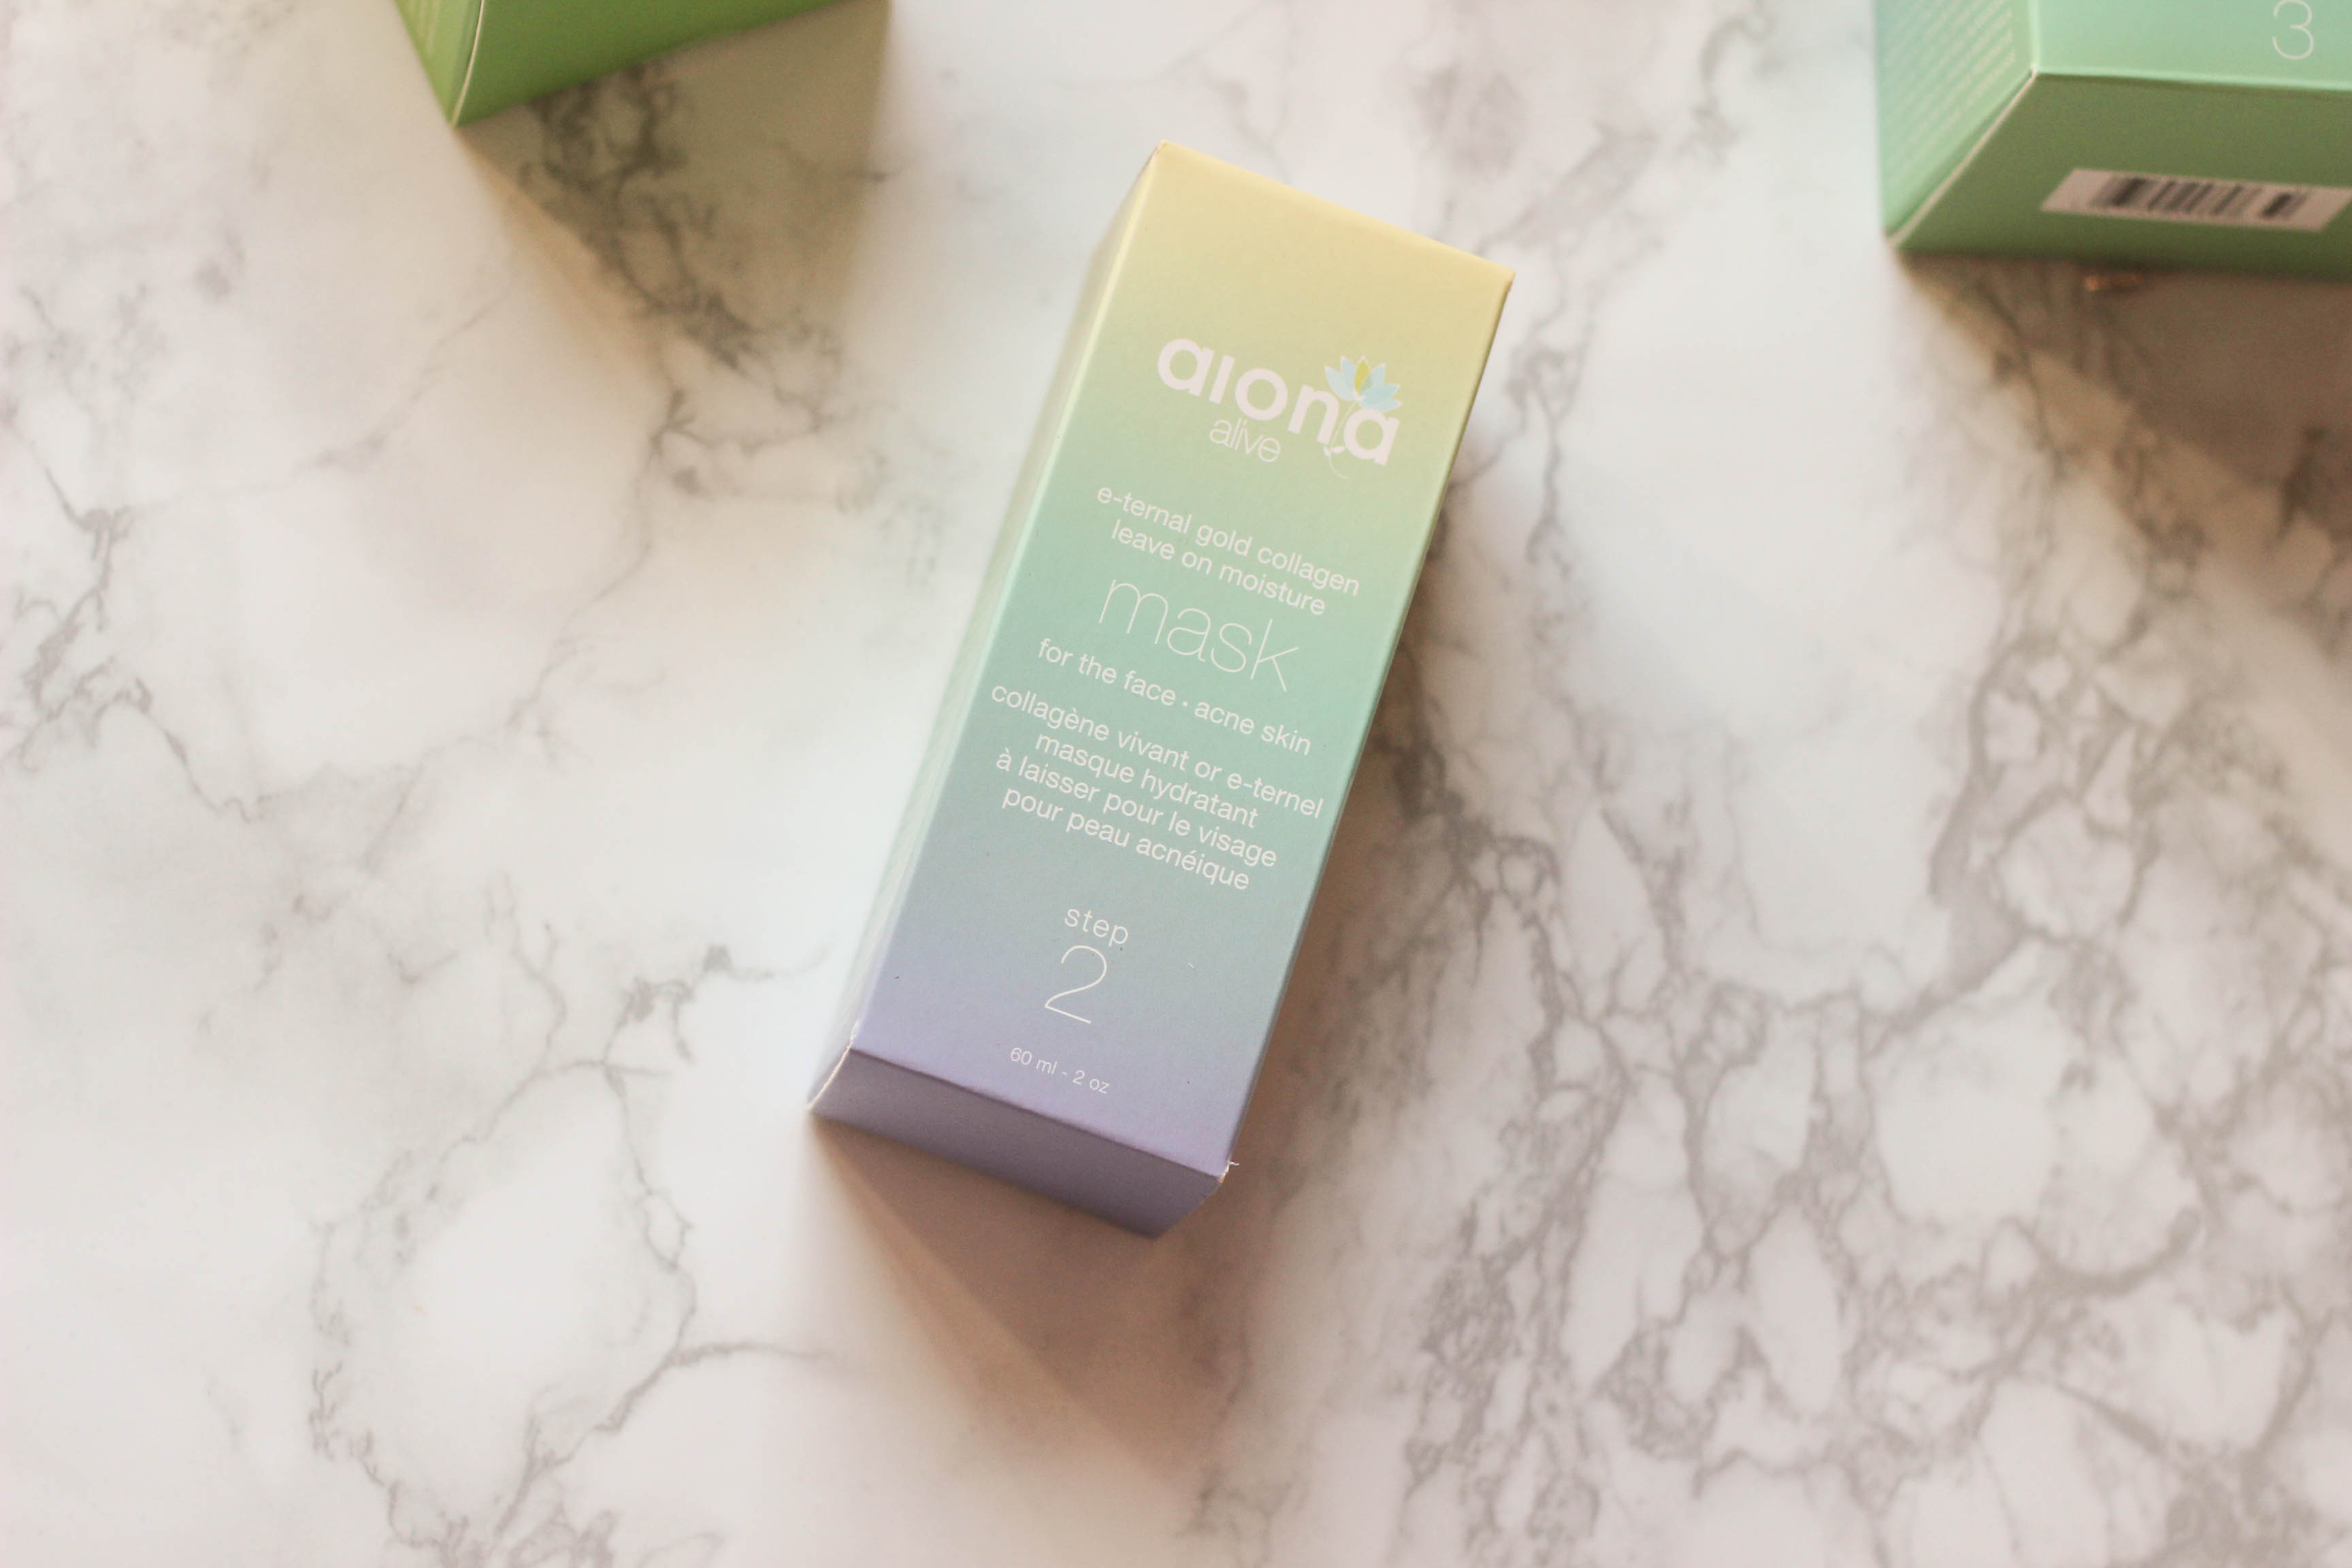 aiona-alive-beauty-review